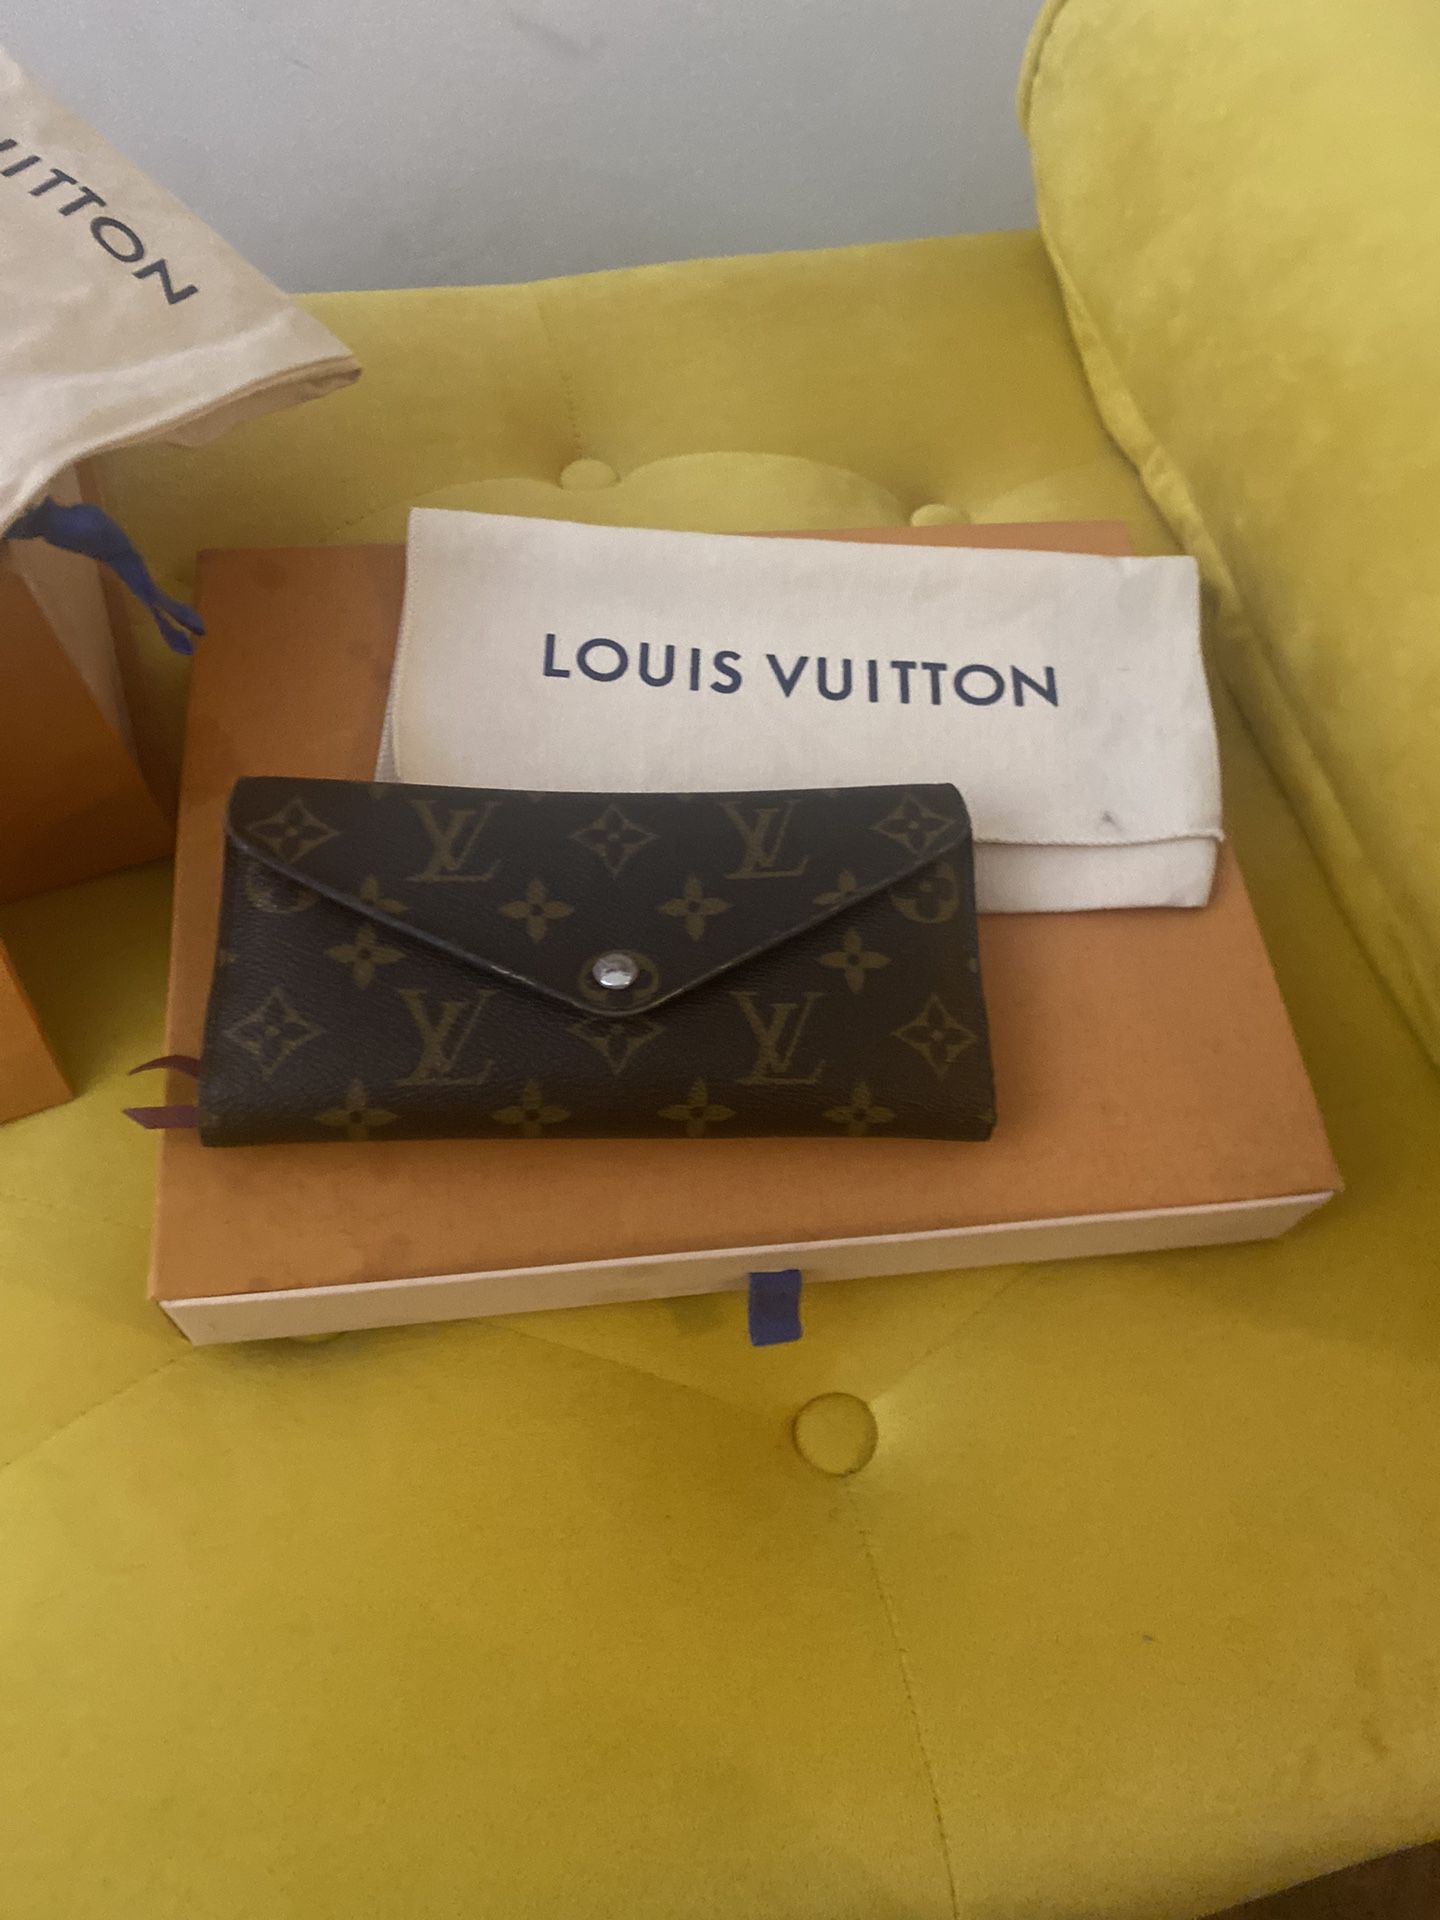 Women Used Louis Vuitton Wallet In Excellent Condition Price $150